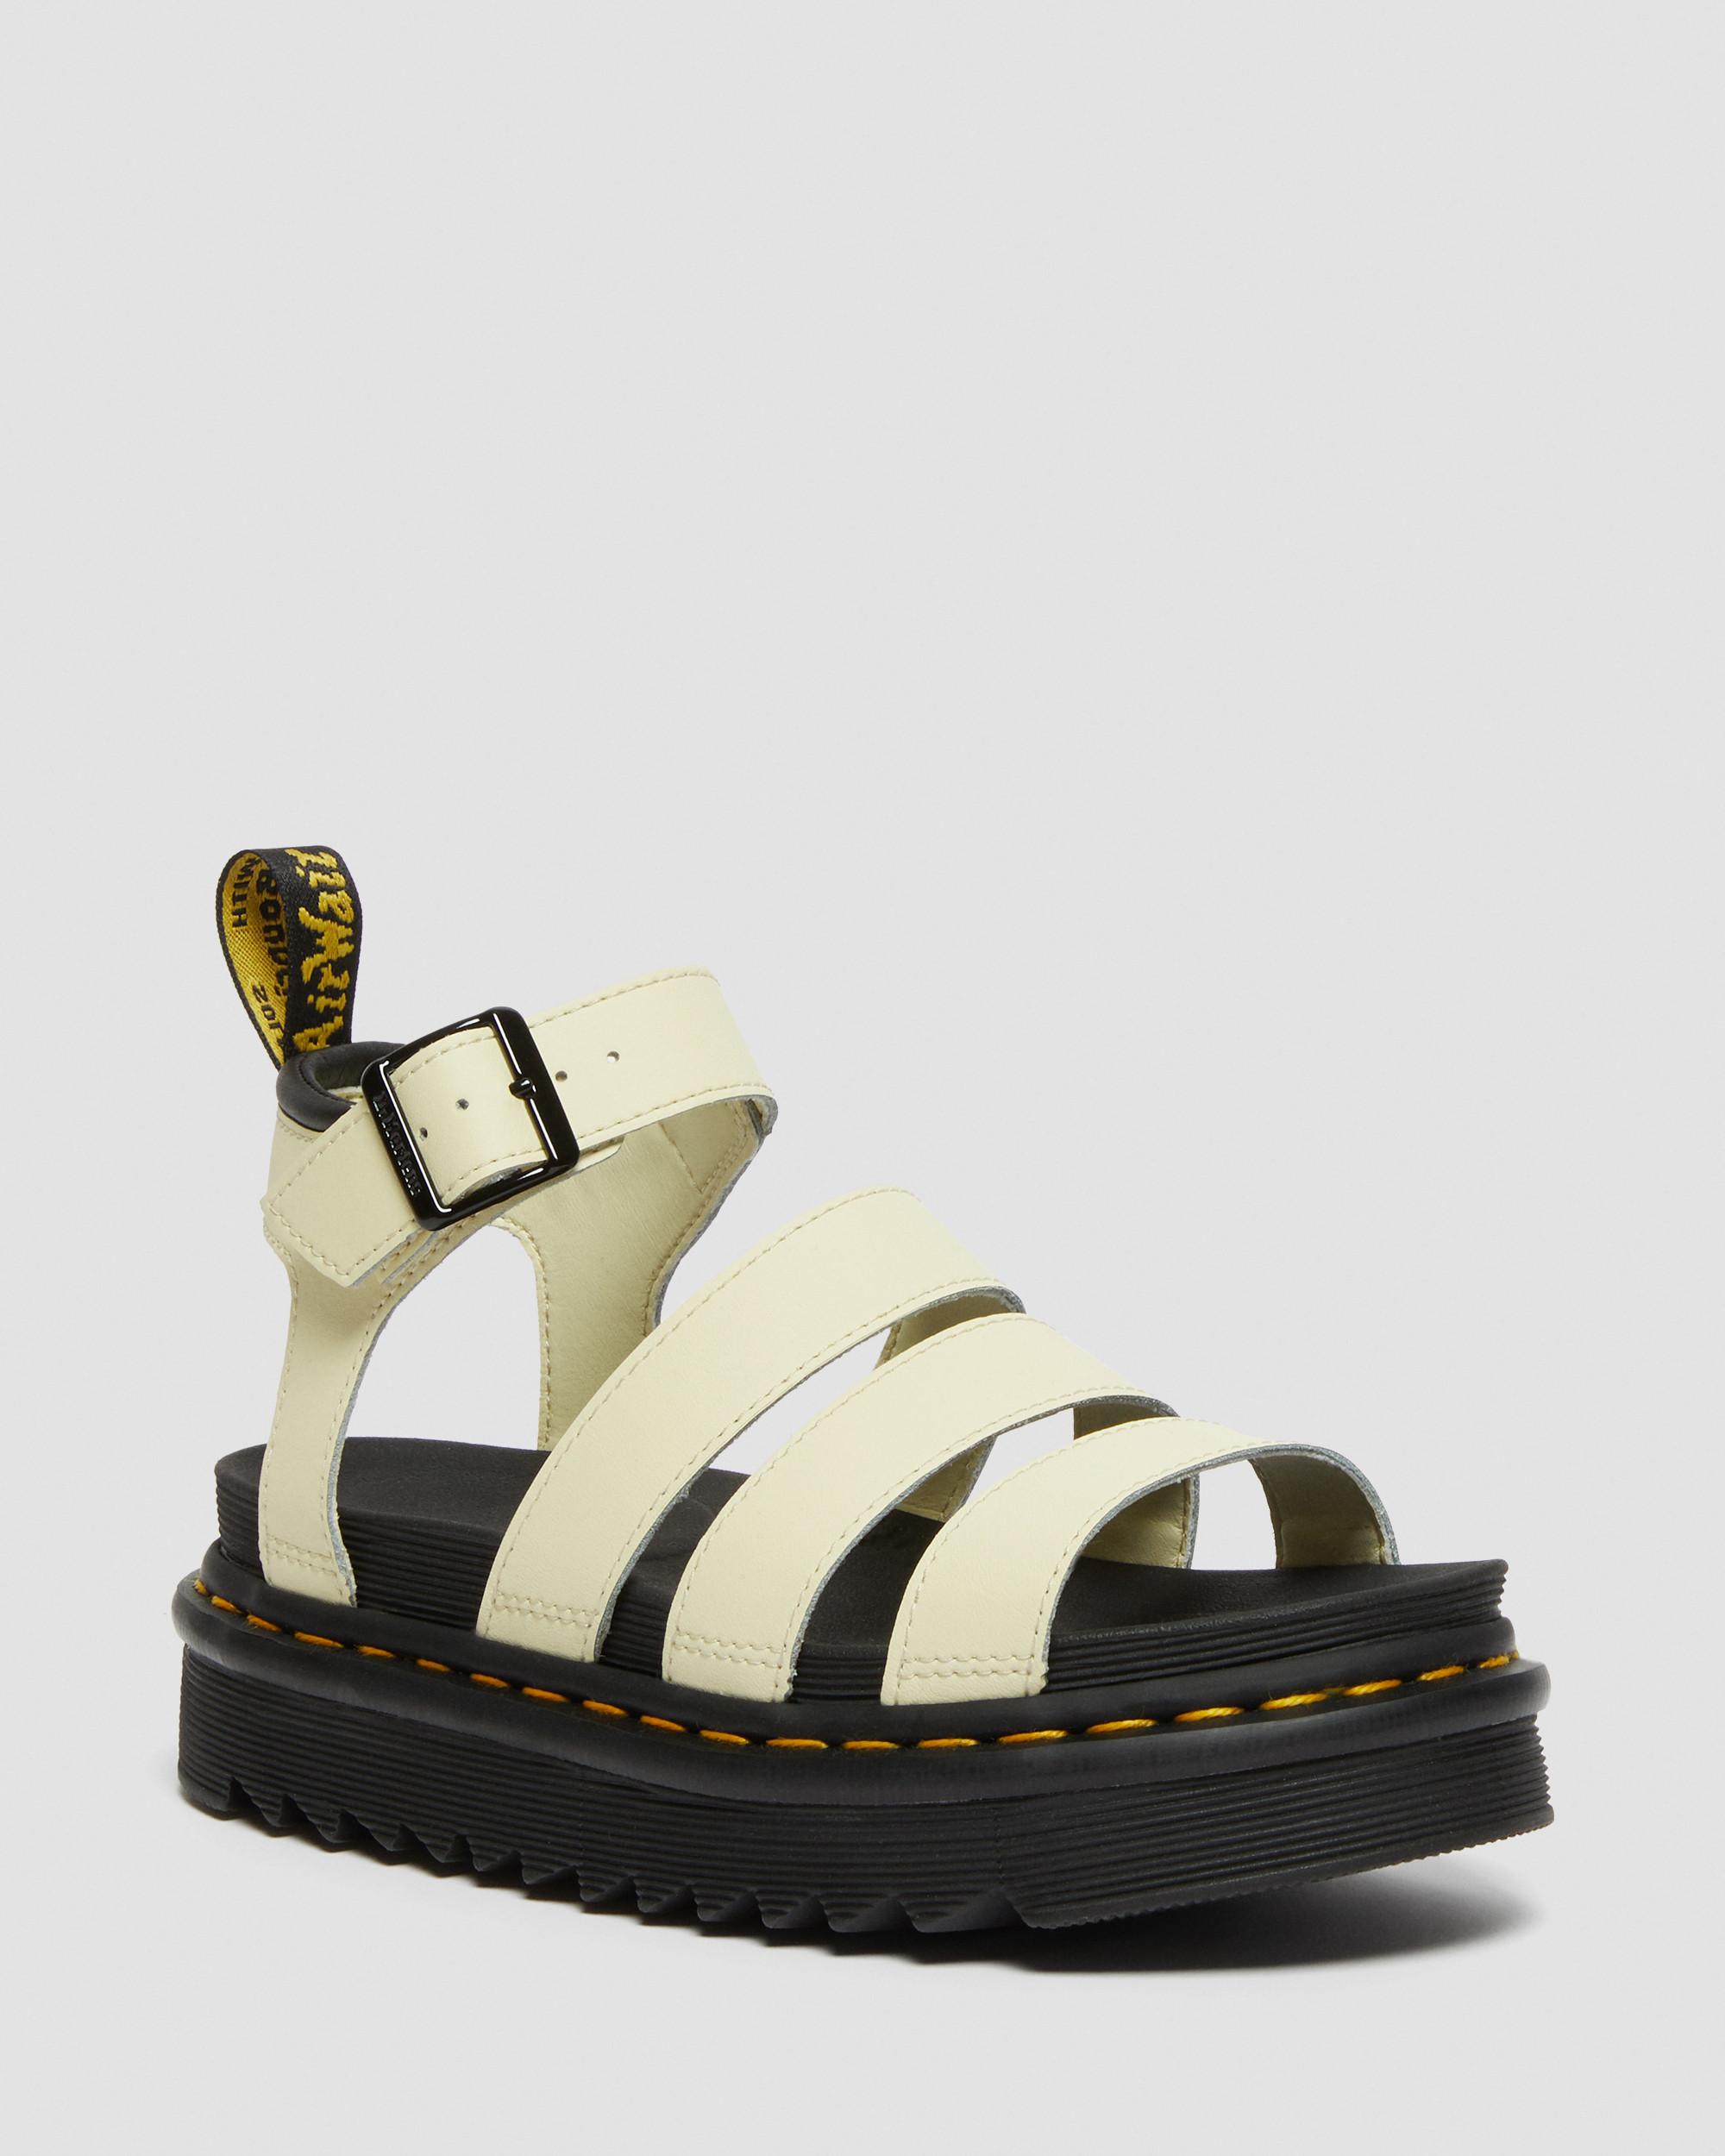 Blaire Hydro Leather Strap Sandals in White